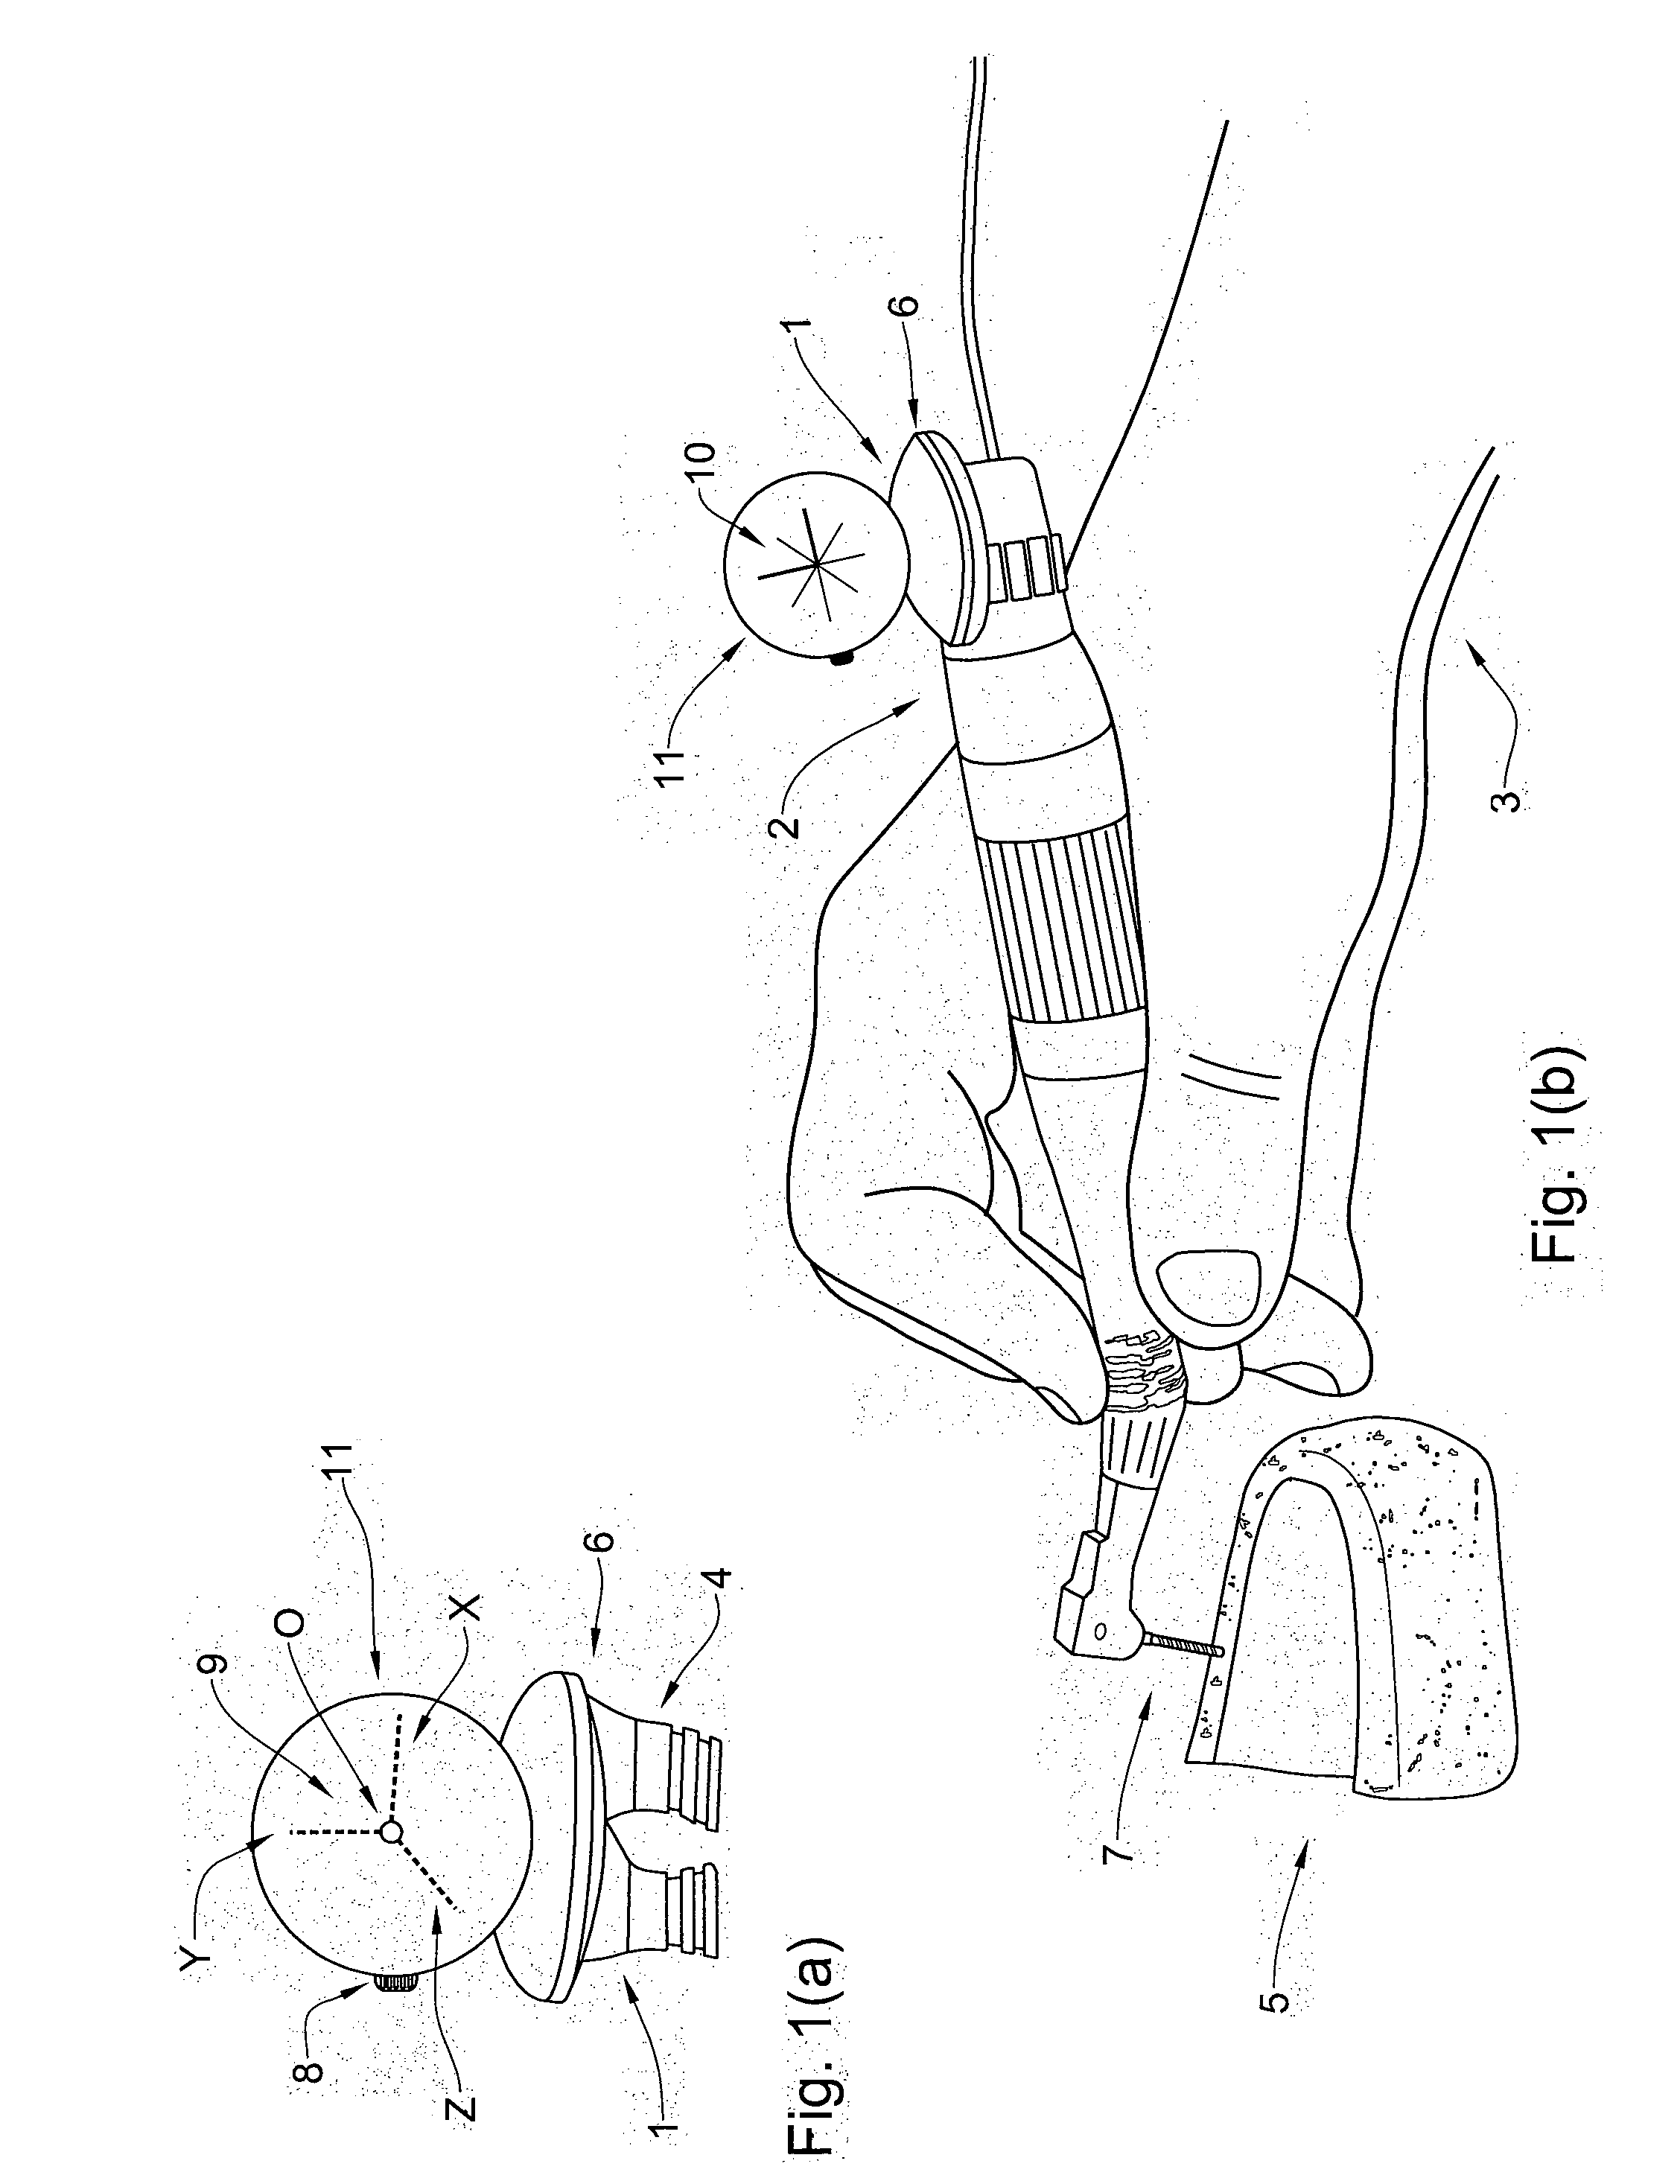 Orientation detector for use with a hand-held surgical or dental tool